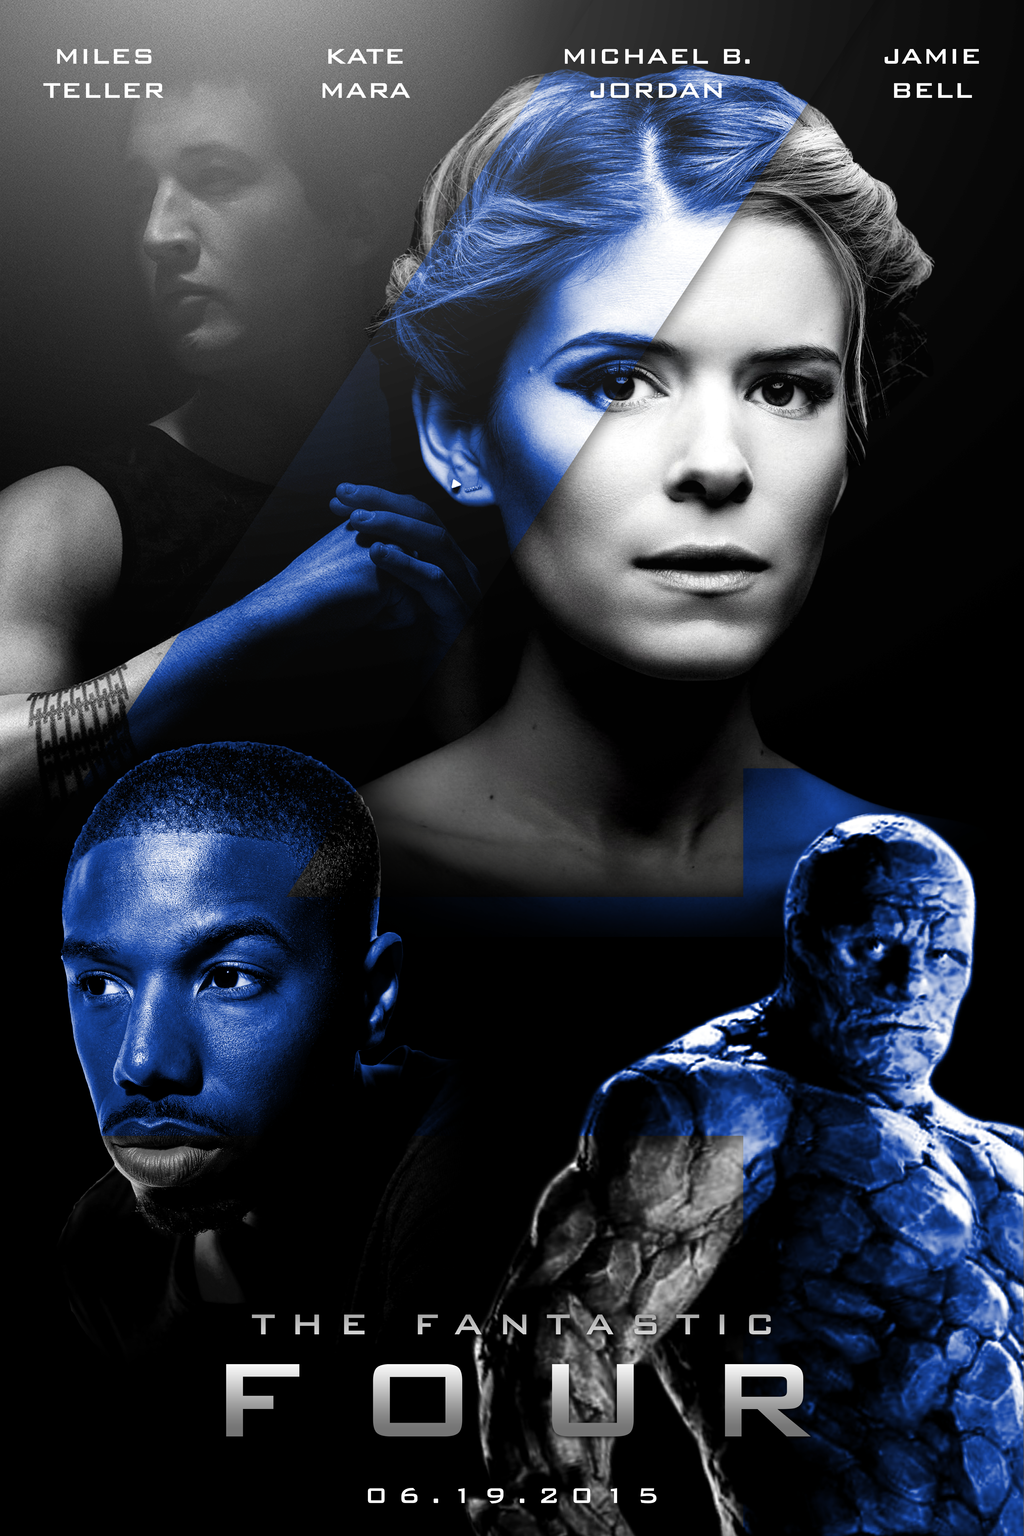 the_fantastic_four___poster_i_by_mrsteiners-d77fc56.png